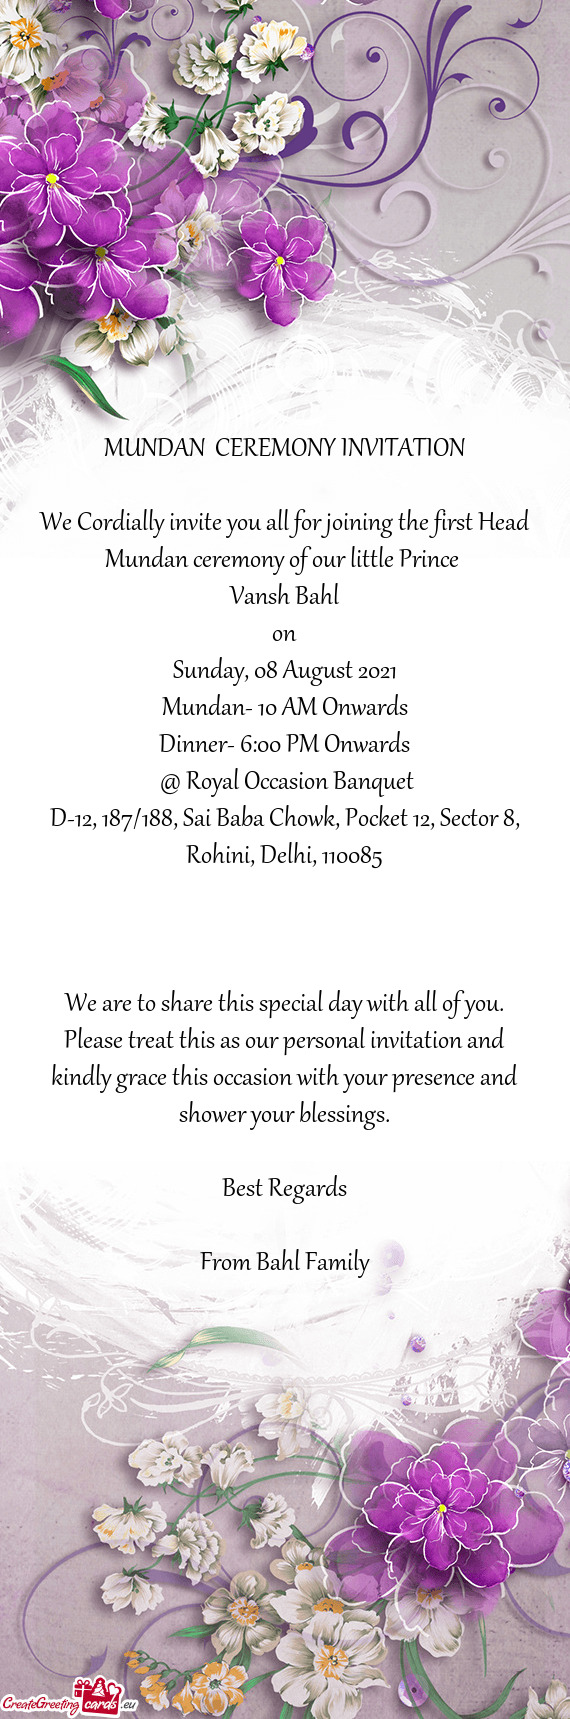 We Cordially invite you all for joining the first Head Mundan ceremony of our little Prince